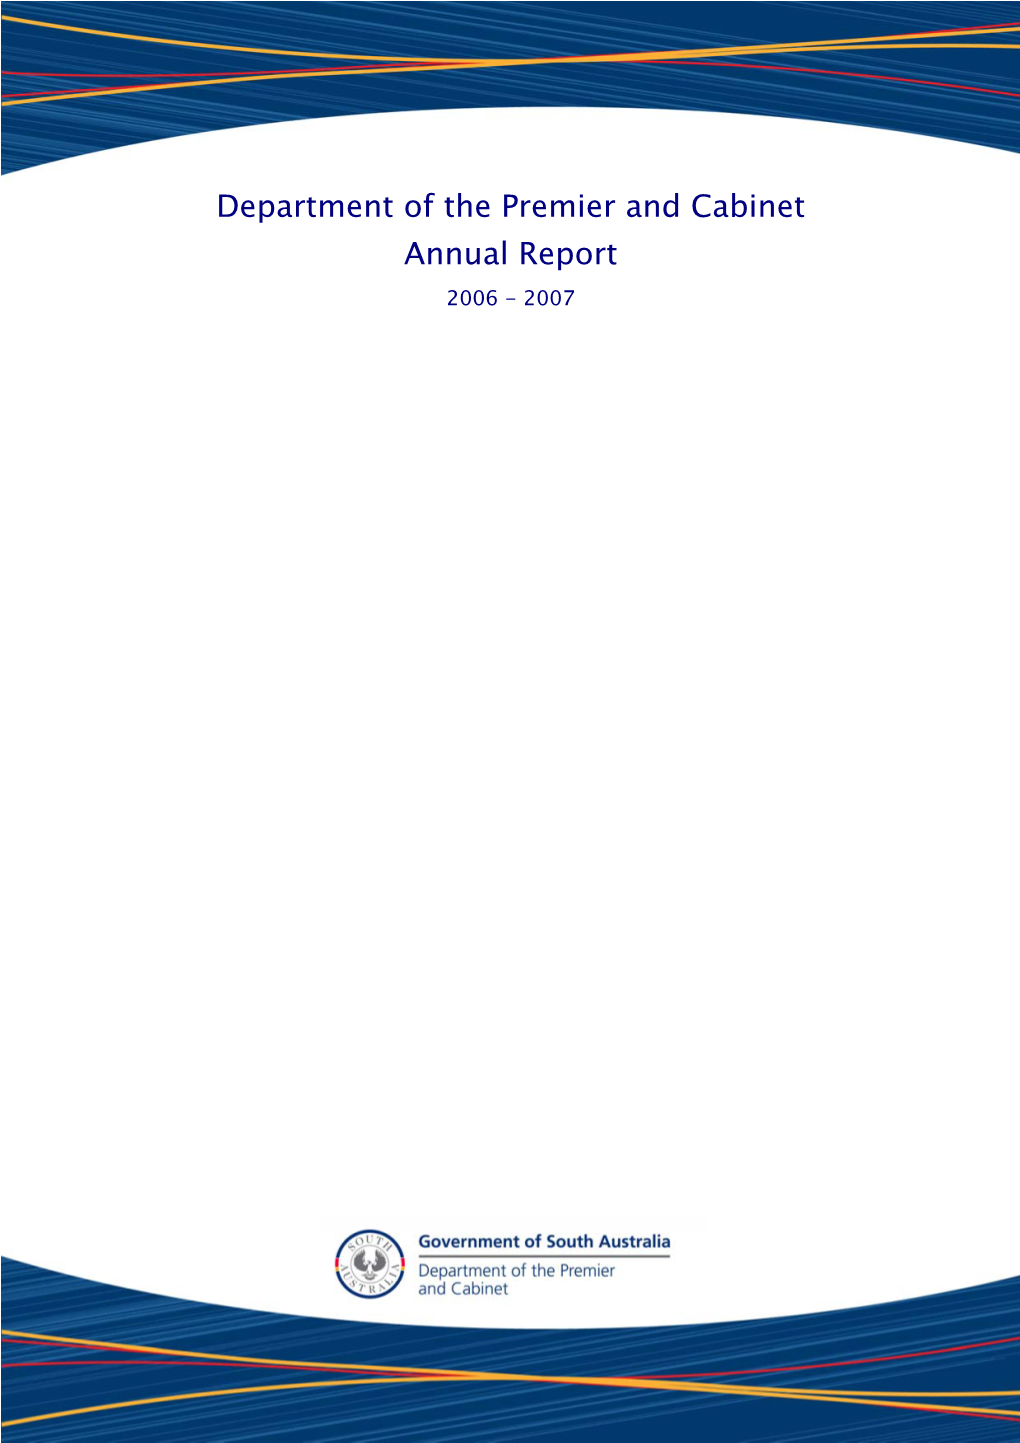 Department of the Premier and Cabinet Annual Report 2006 - 2007